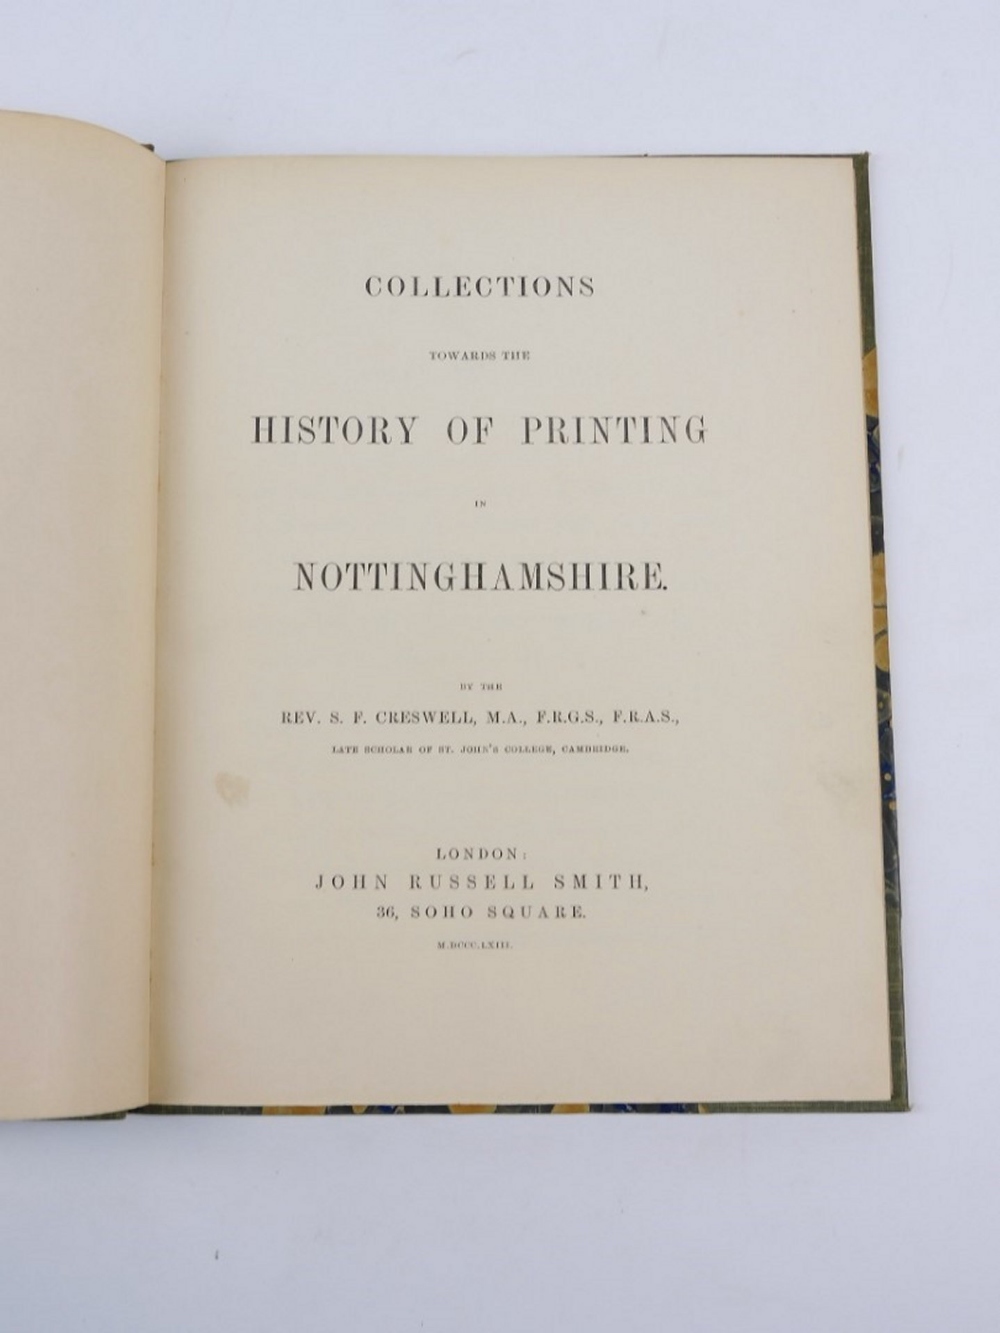 Cresswell (Rev. S.F.) COLLECTIONS TOWARDS THE HISTORY OF PRINTING IN NOTTINGHAMSHIRE, contemporary c - Image 2 of 3